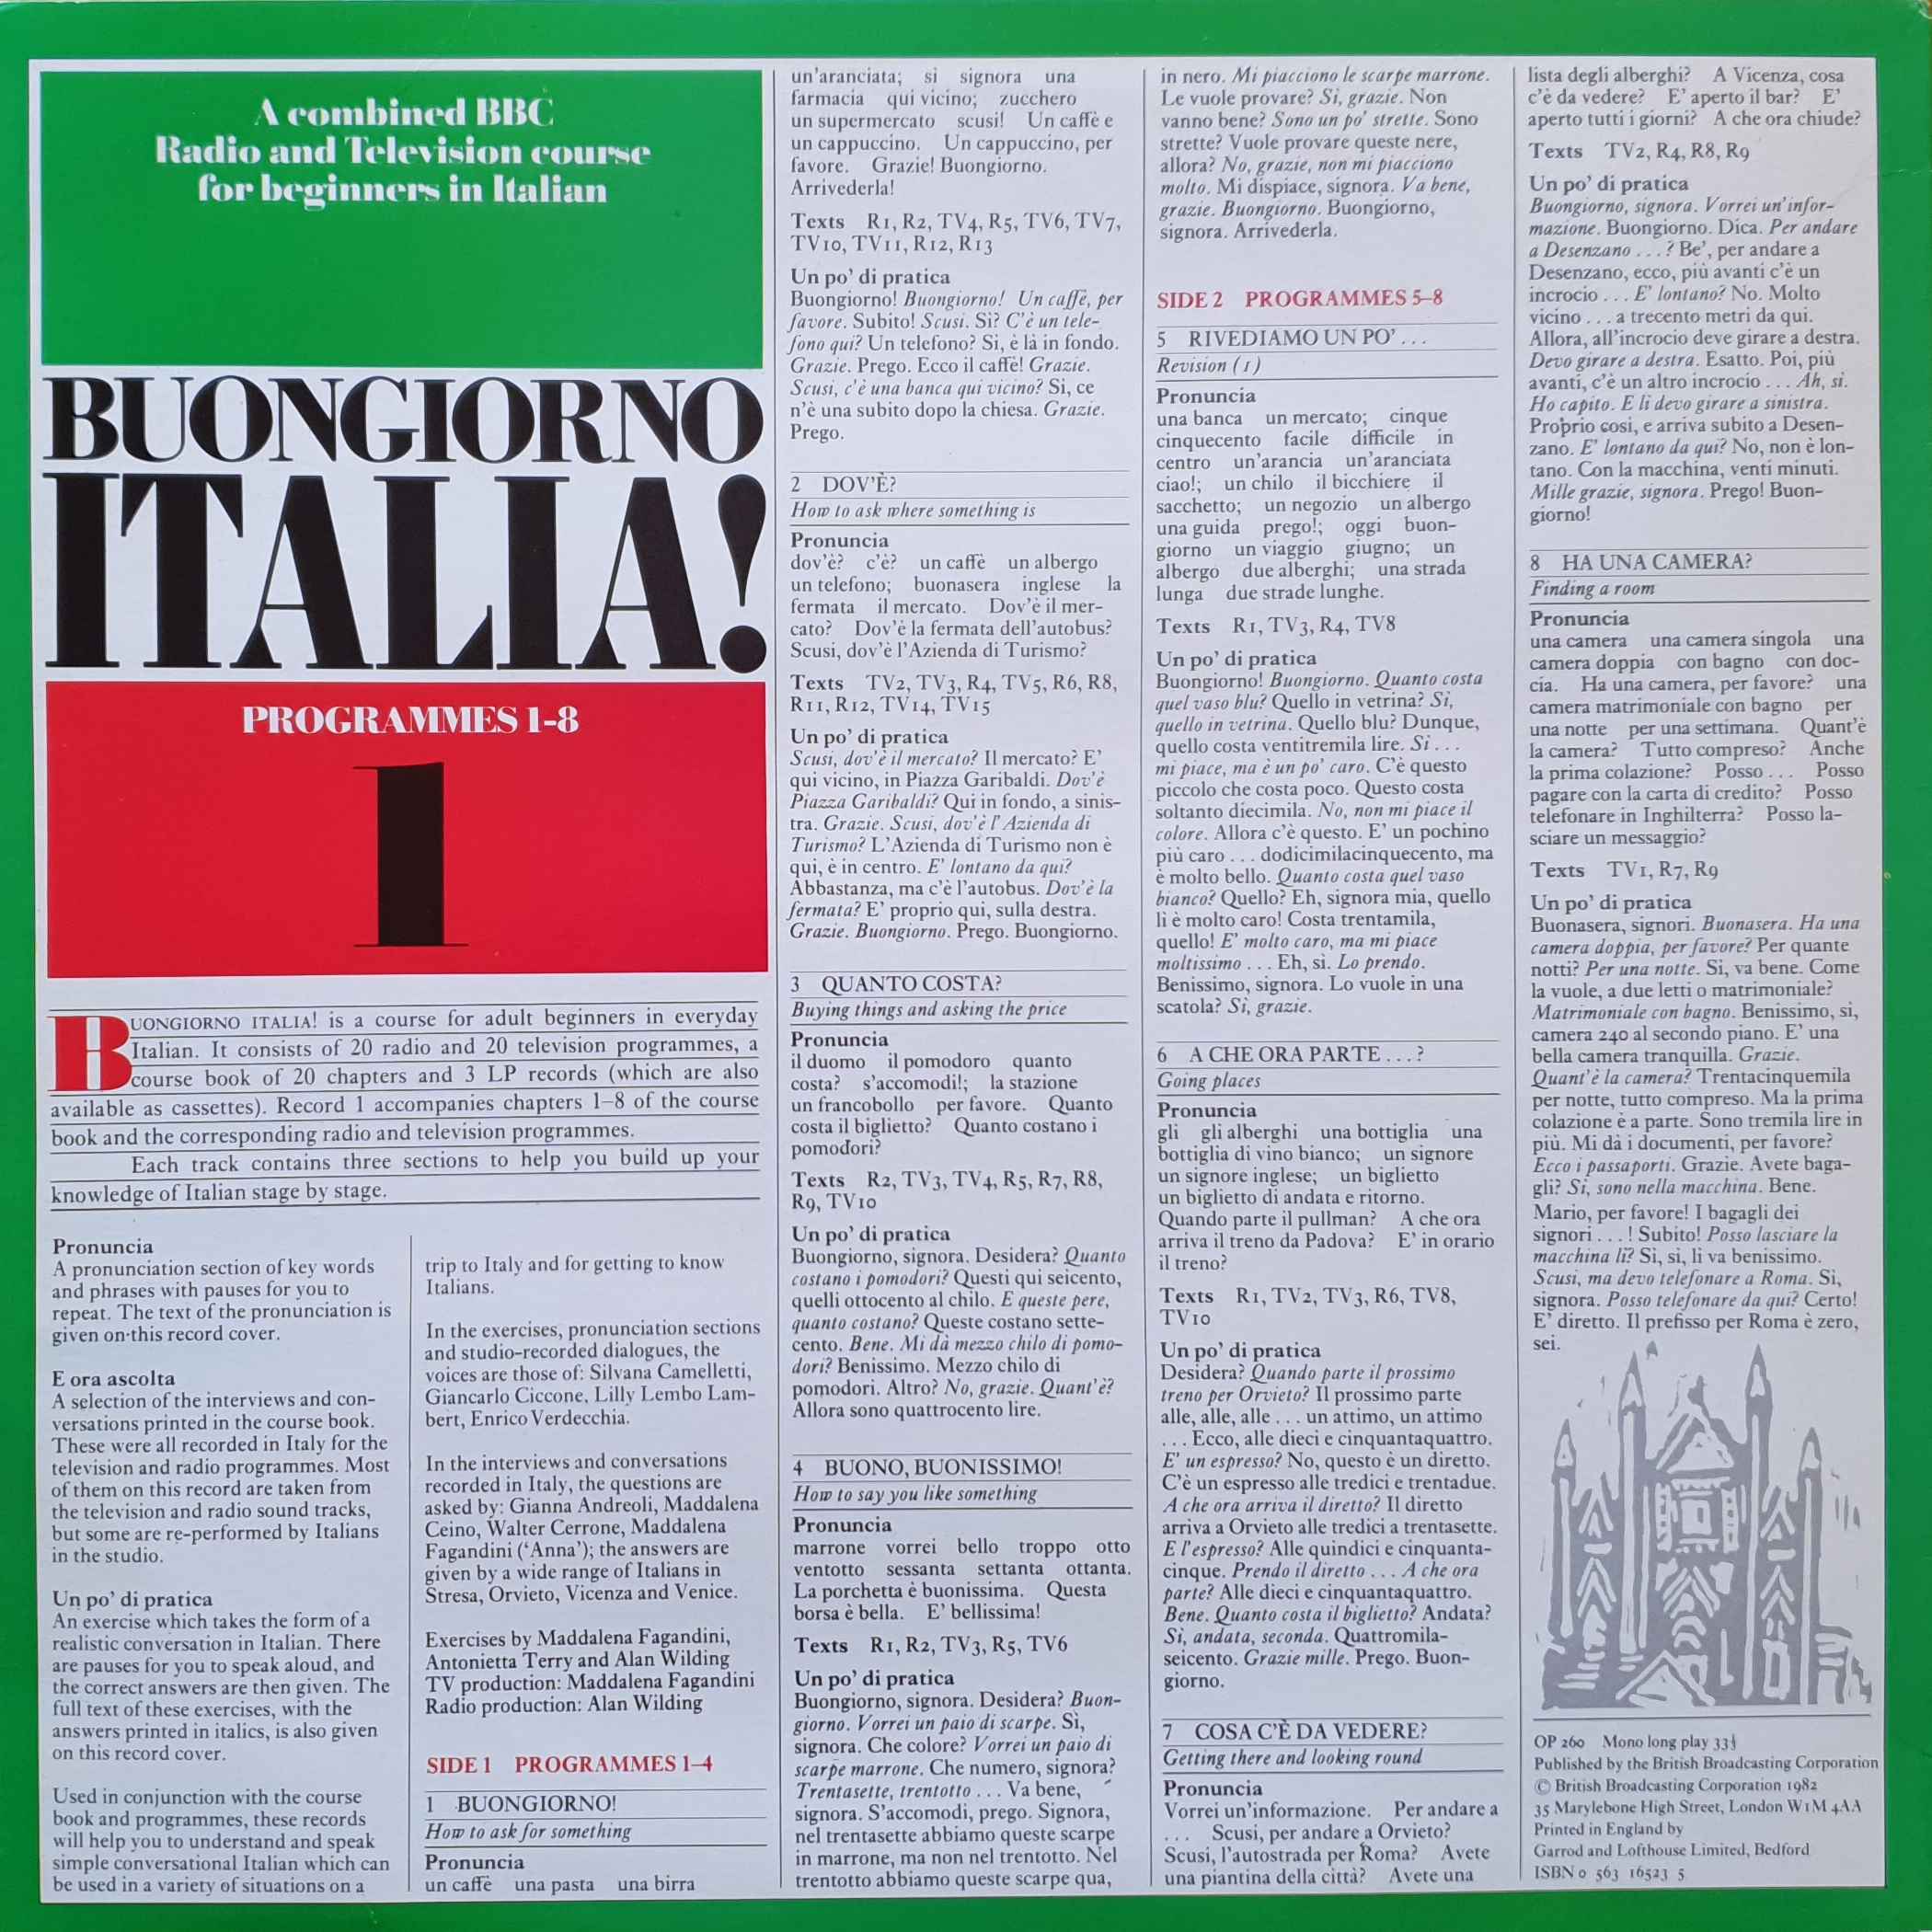 Picture of OP 260 Buongiorno Italia - 1-8 by artist Maddalena Fagandini / Antonietta Terry / Alan Wilding from the BBC records and Tapes library